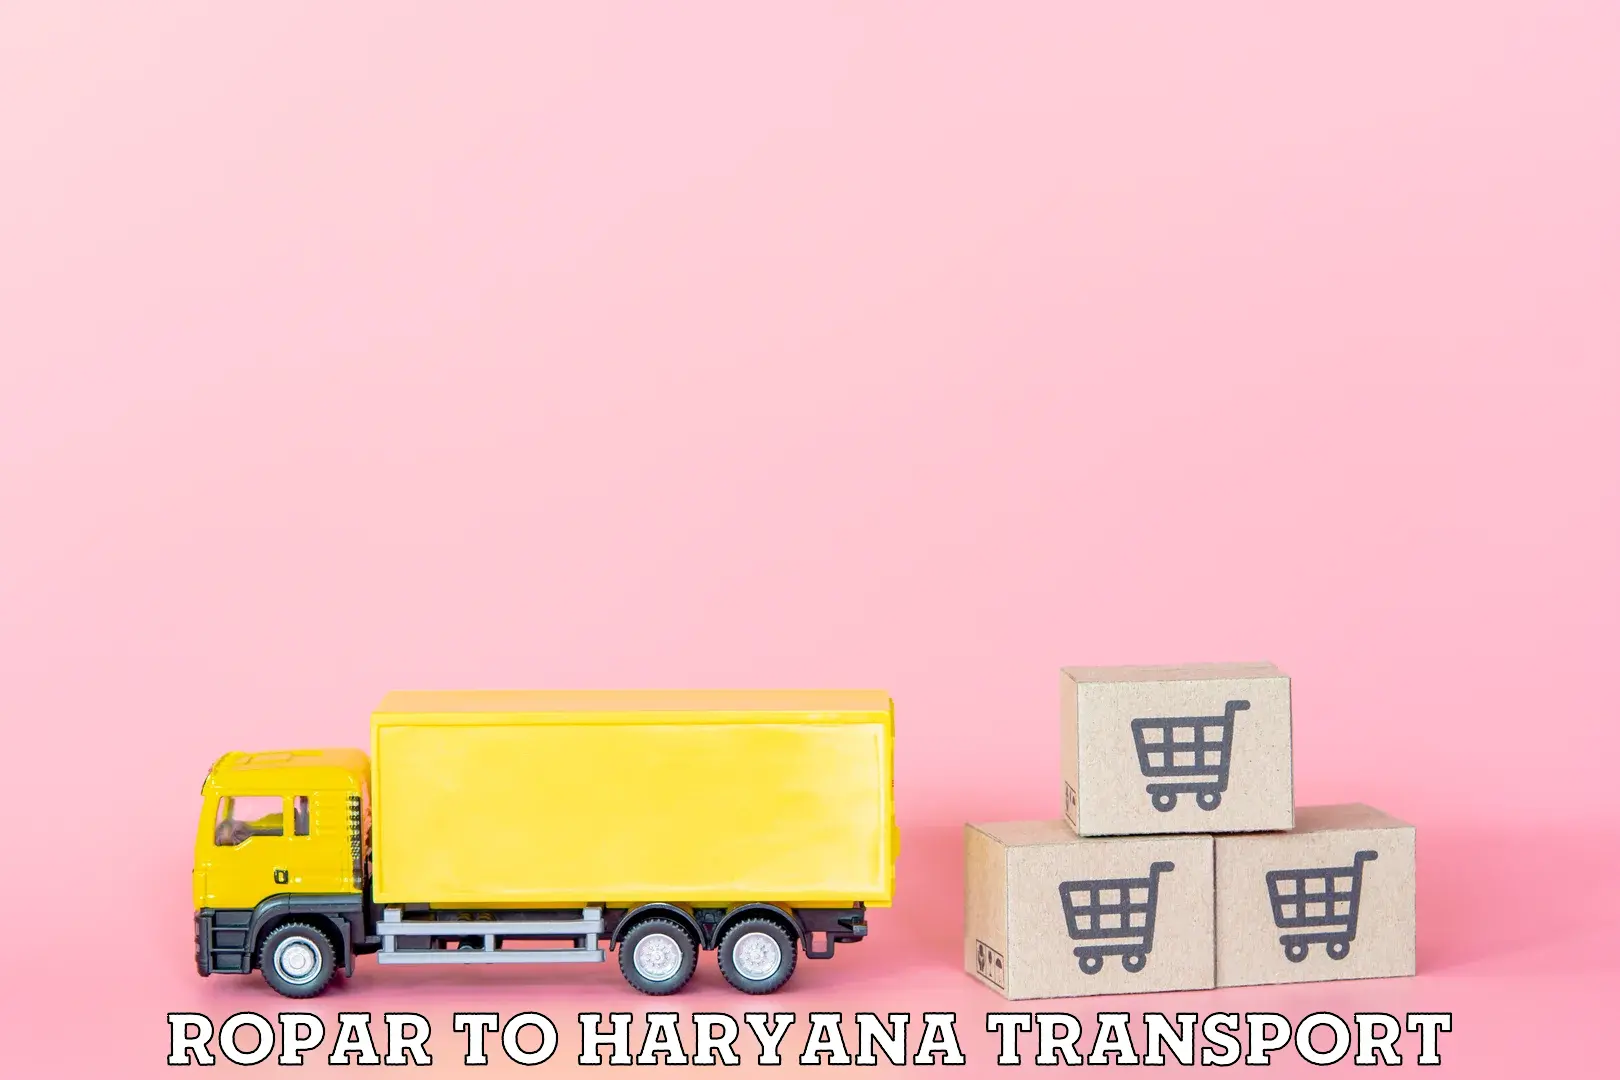 Air freight transport services Ropar to Bilaspur Haryana